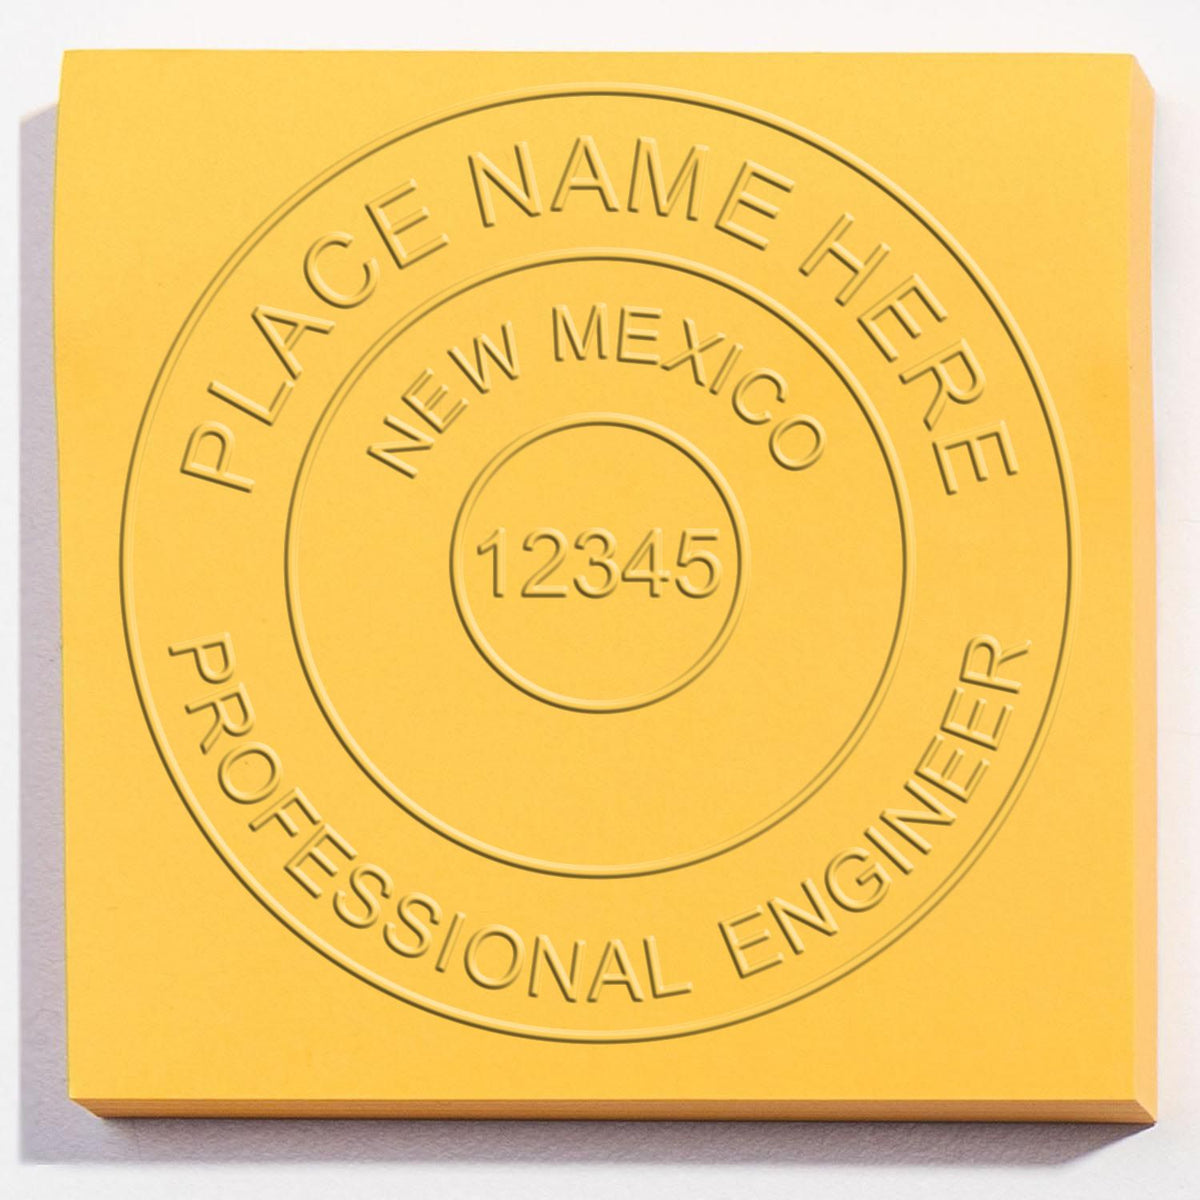 The Gift New Mexico Engineer Seal stamp impression comes to life with a crisp, detailed image stamped on paper - showcasing true professional quality.